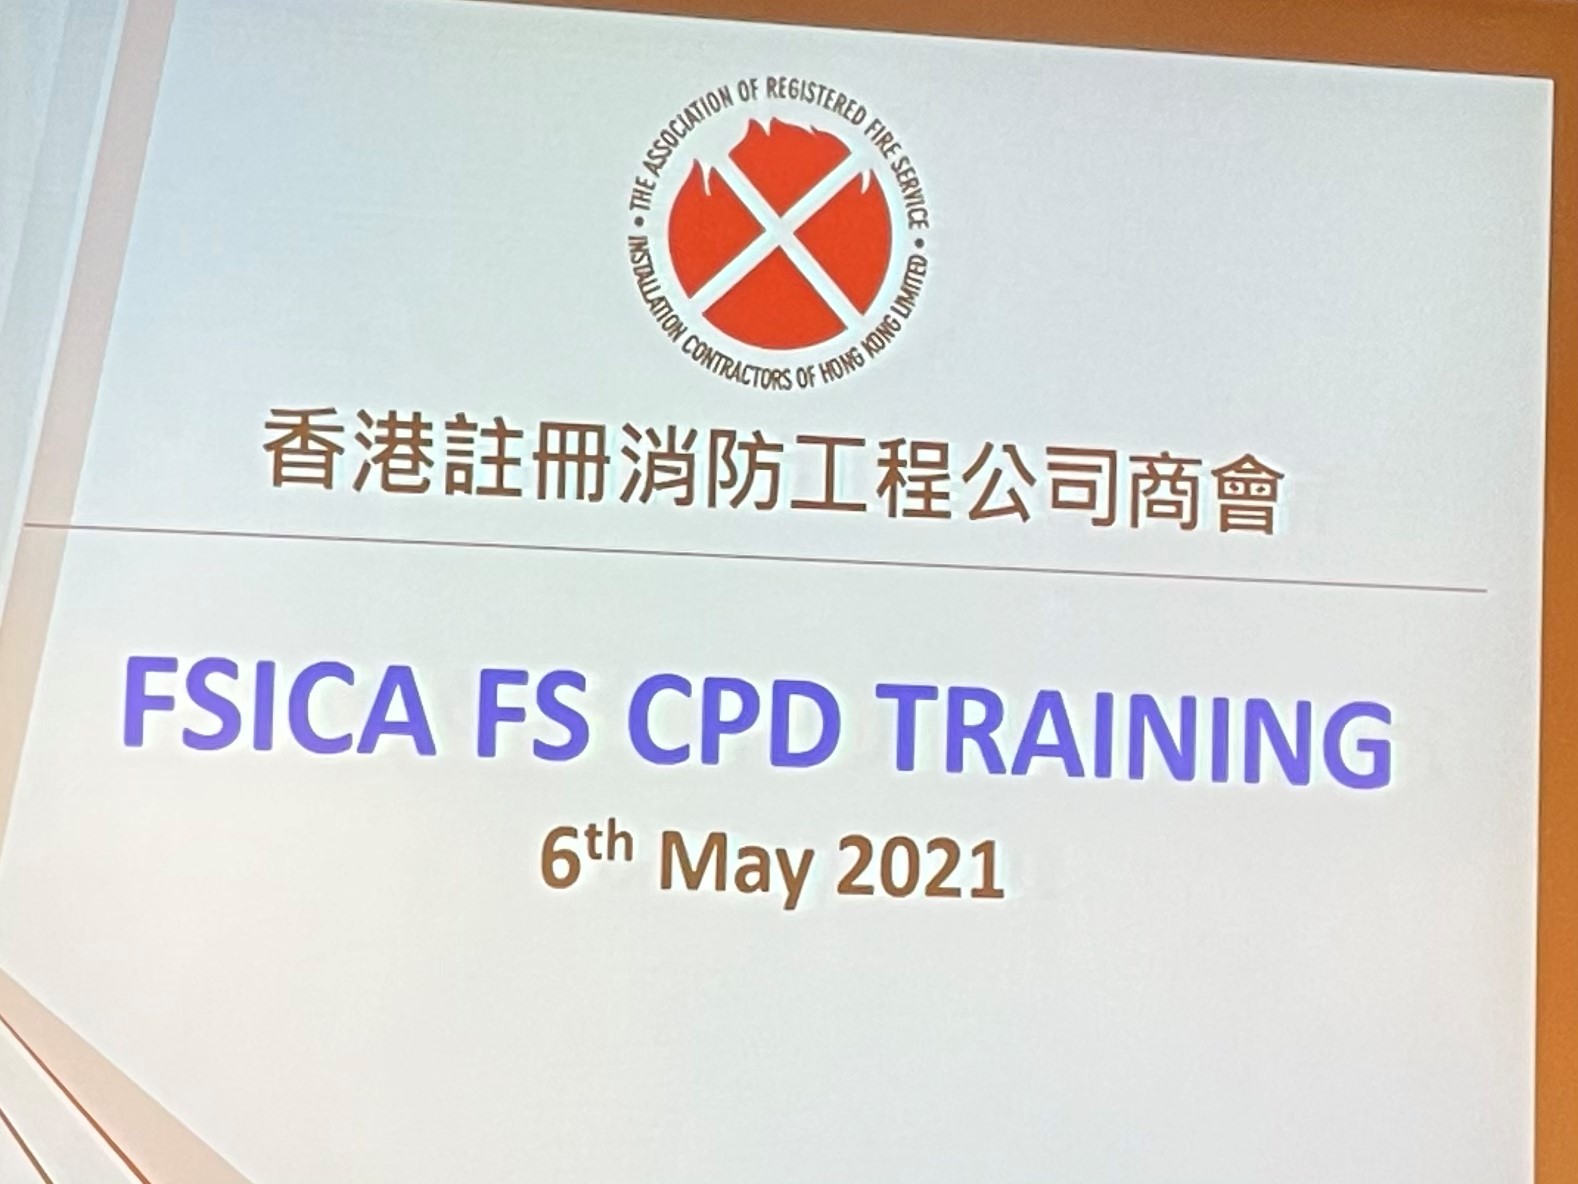 Img 8838 2 - Fsica Fs Training Course 2021 - Thank You For All Support, Quota Are Now Full. 培訓研討會現已額滿 . 多謝各會員支持參與